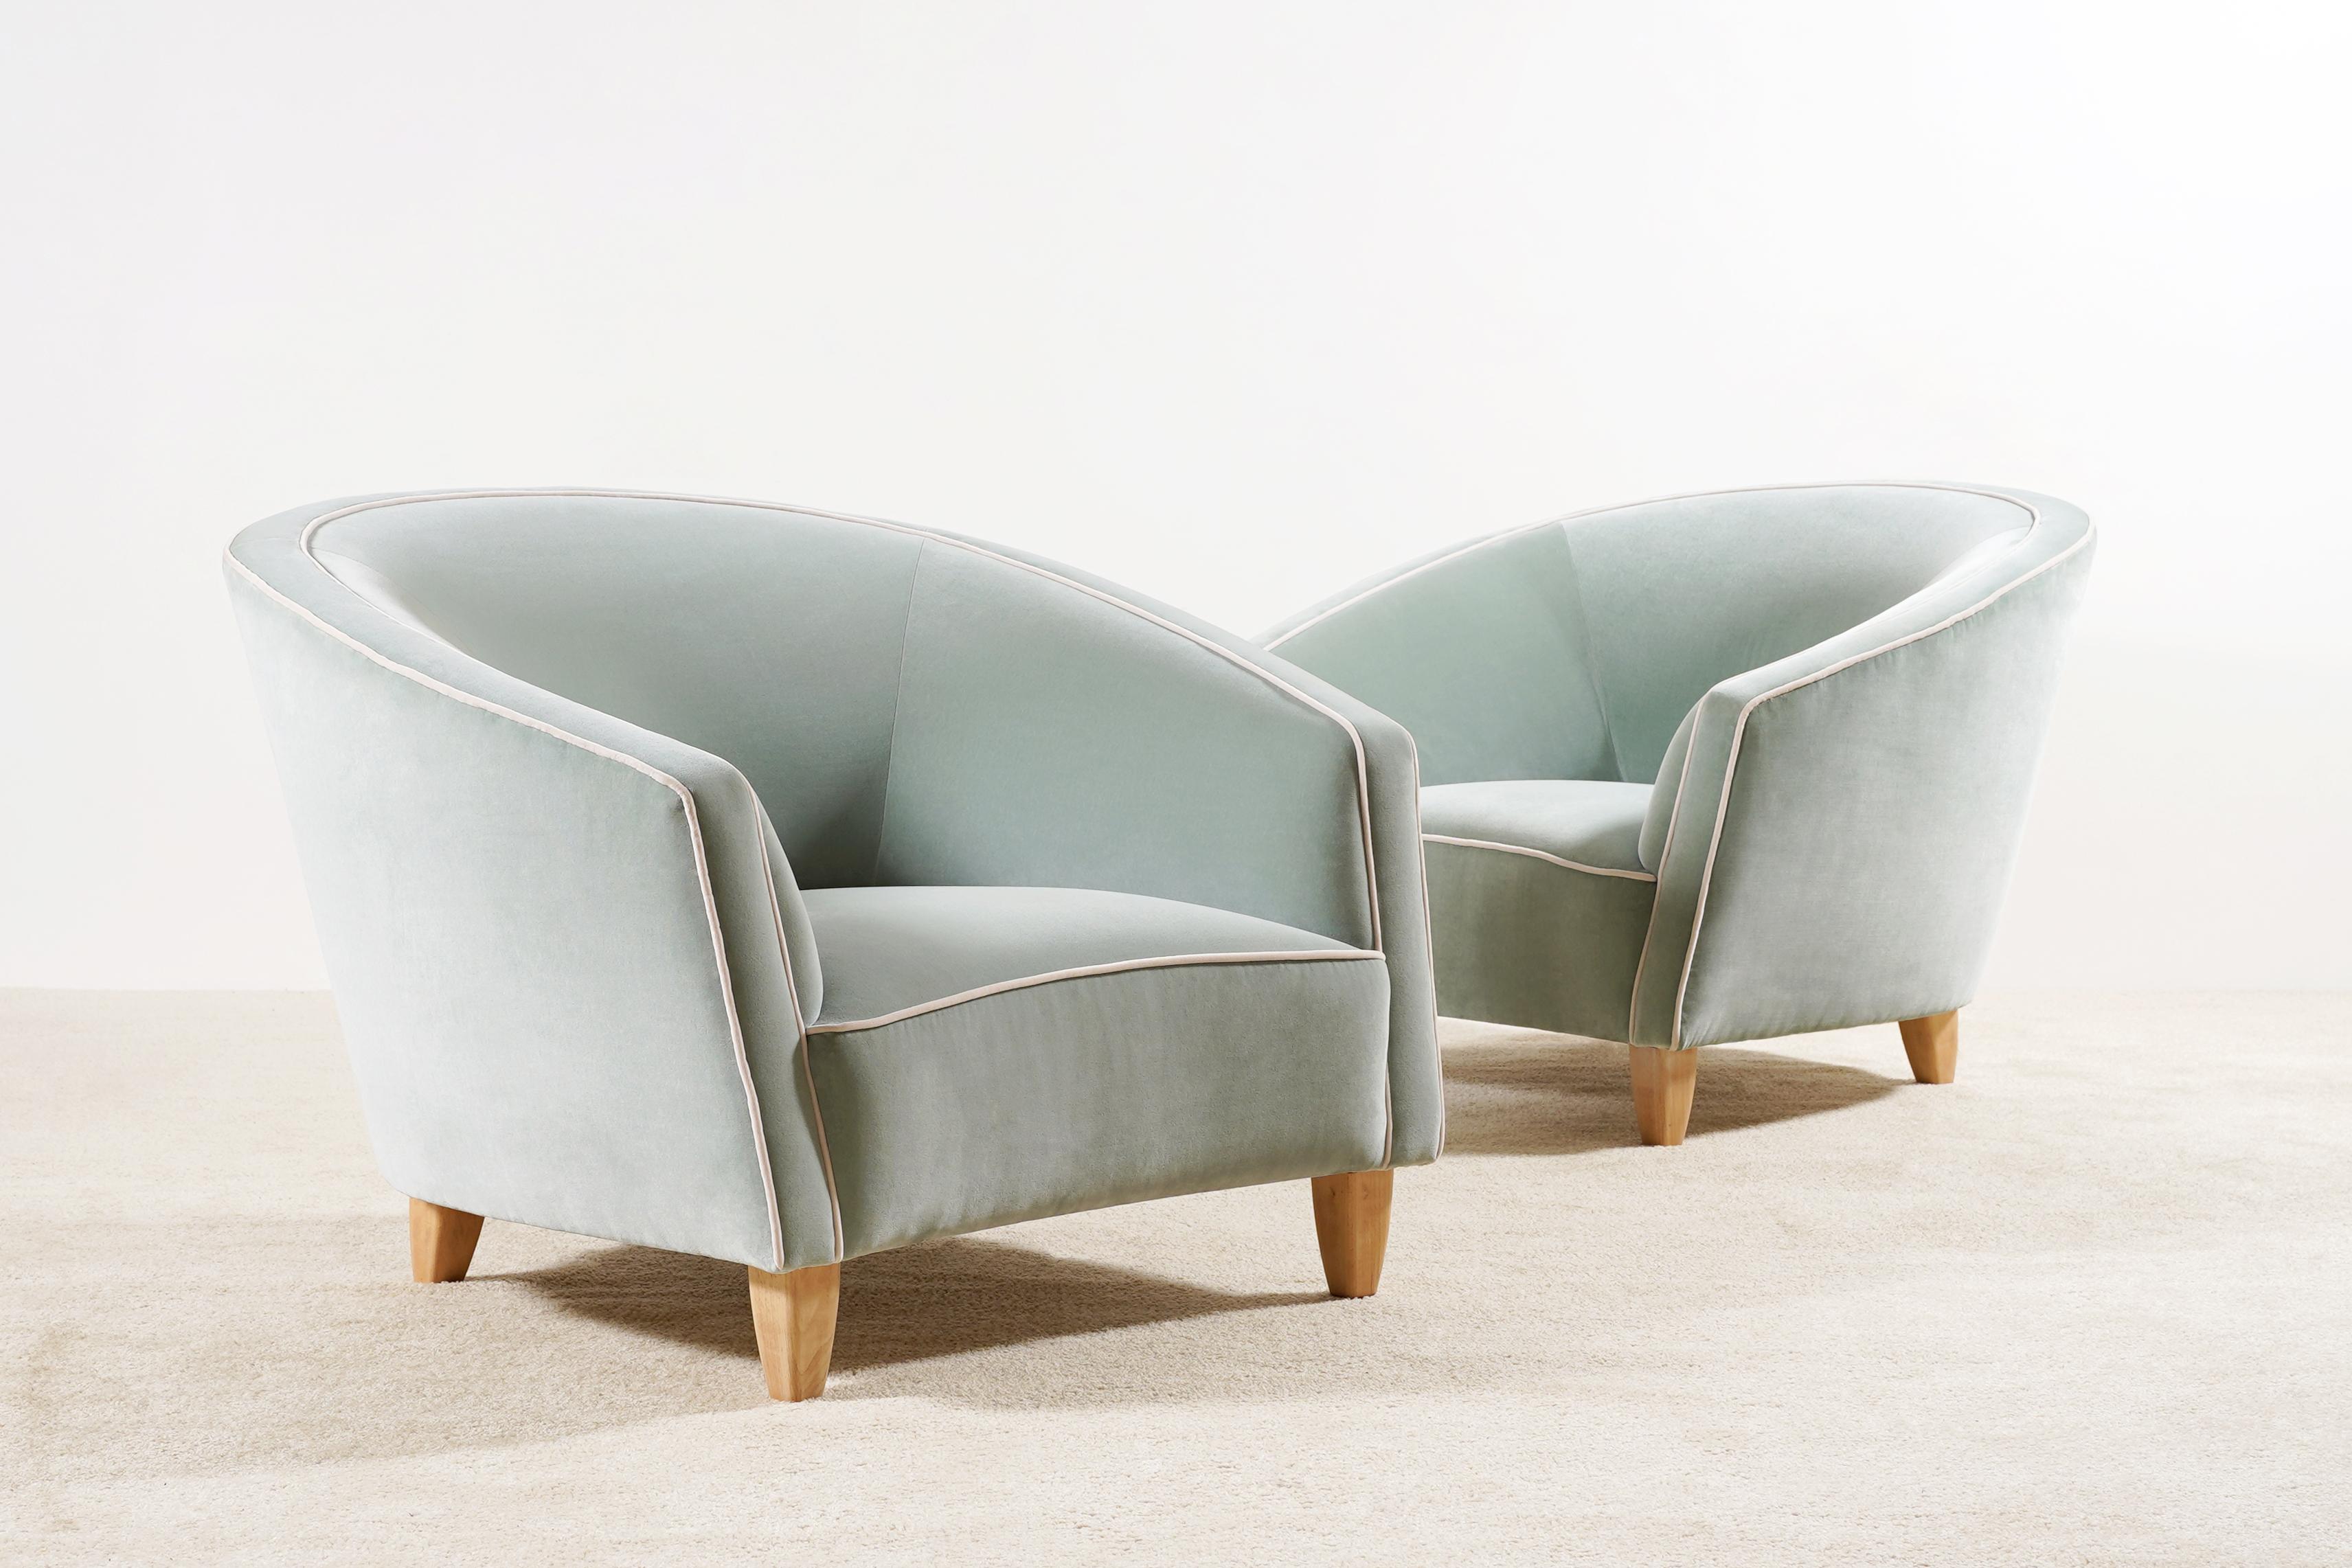 Elegant Pair of Italian Armchairs. Circa 1950/60.
Soft and comfortable seat. Light beech waxed feet.
Perfect condition.

Original pieces from the 1950s newly re-upholstered in the traditional way by the best French craftsmen, we used a high quality